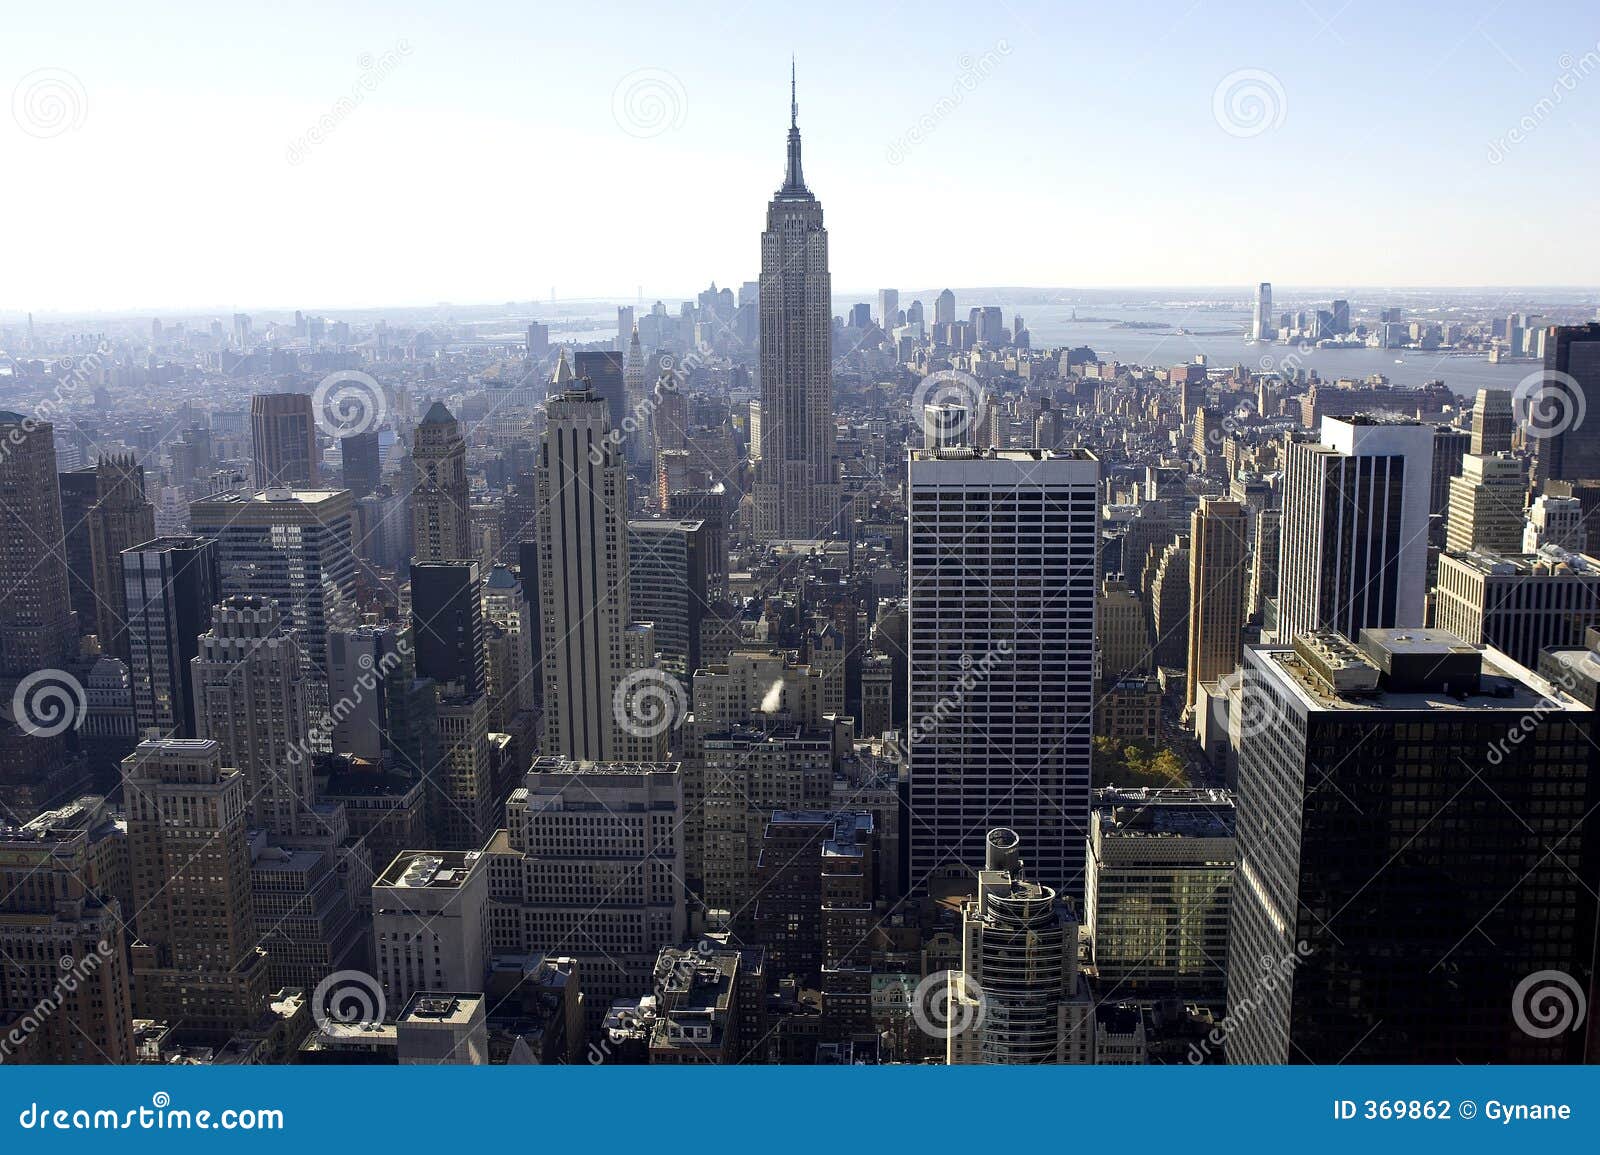 view of empire state building